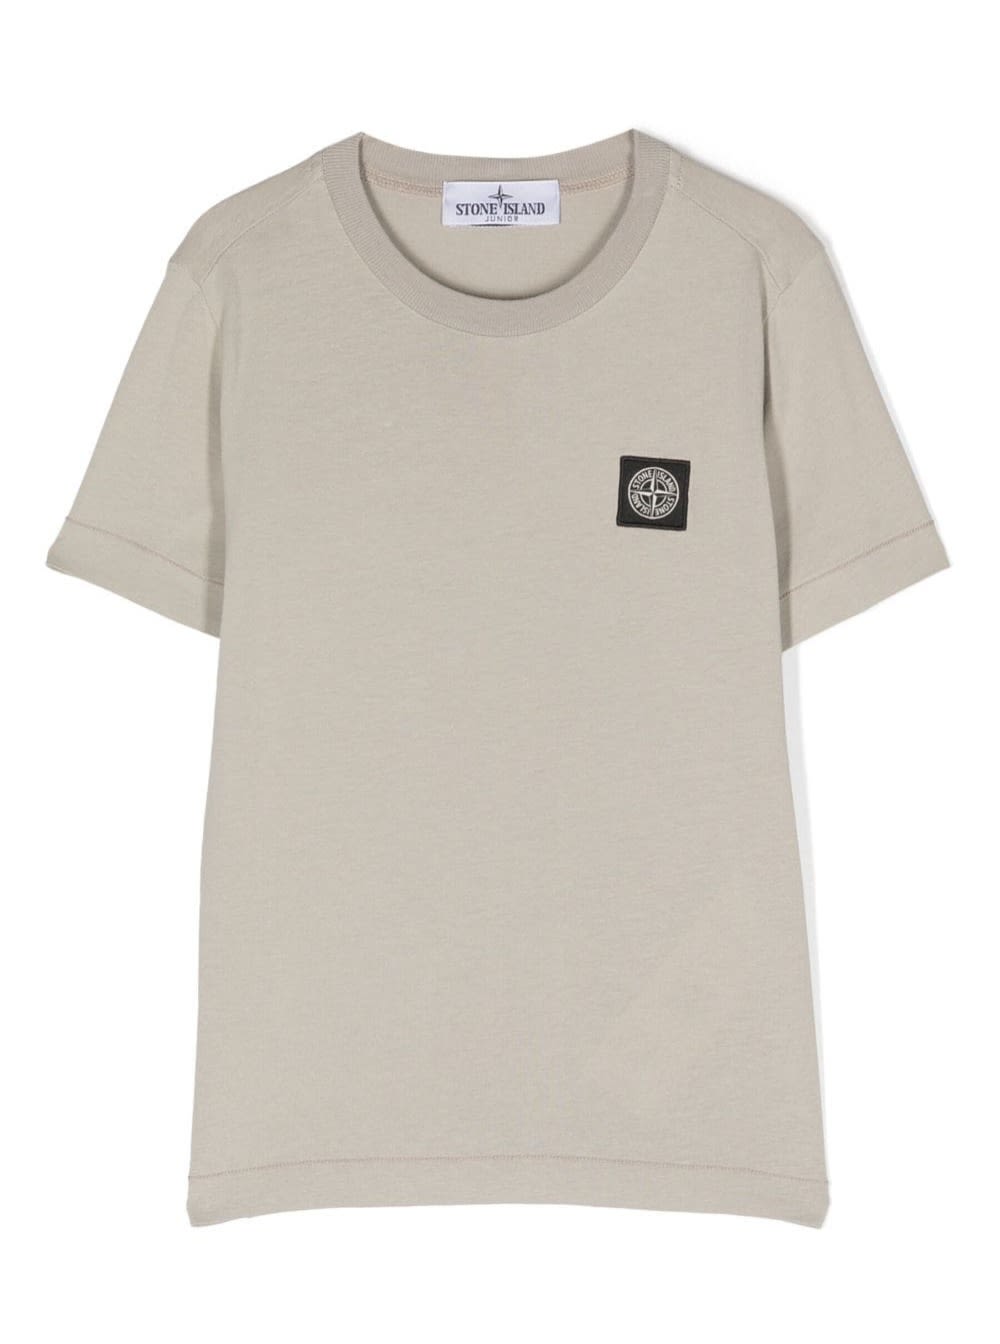 STONE ISLAND JUNIOR GREY CREWNECK SHORT-SLEEVED T-SHIRT AND CONTRASTING PATCH LOGO IN COTTON BOY